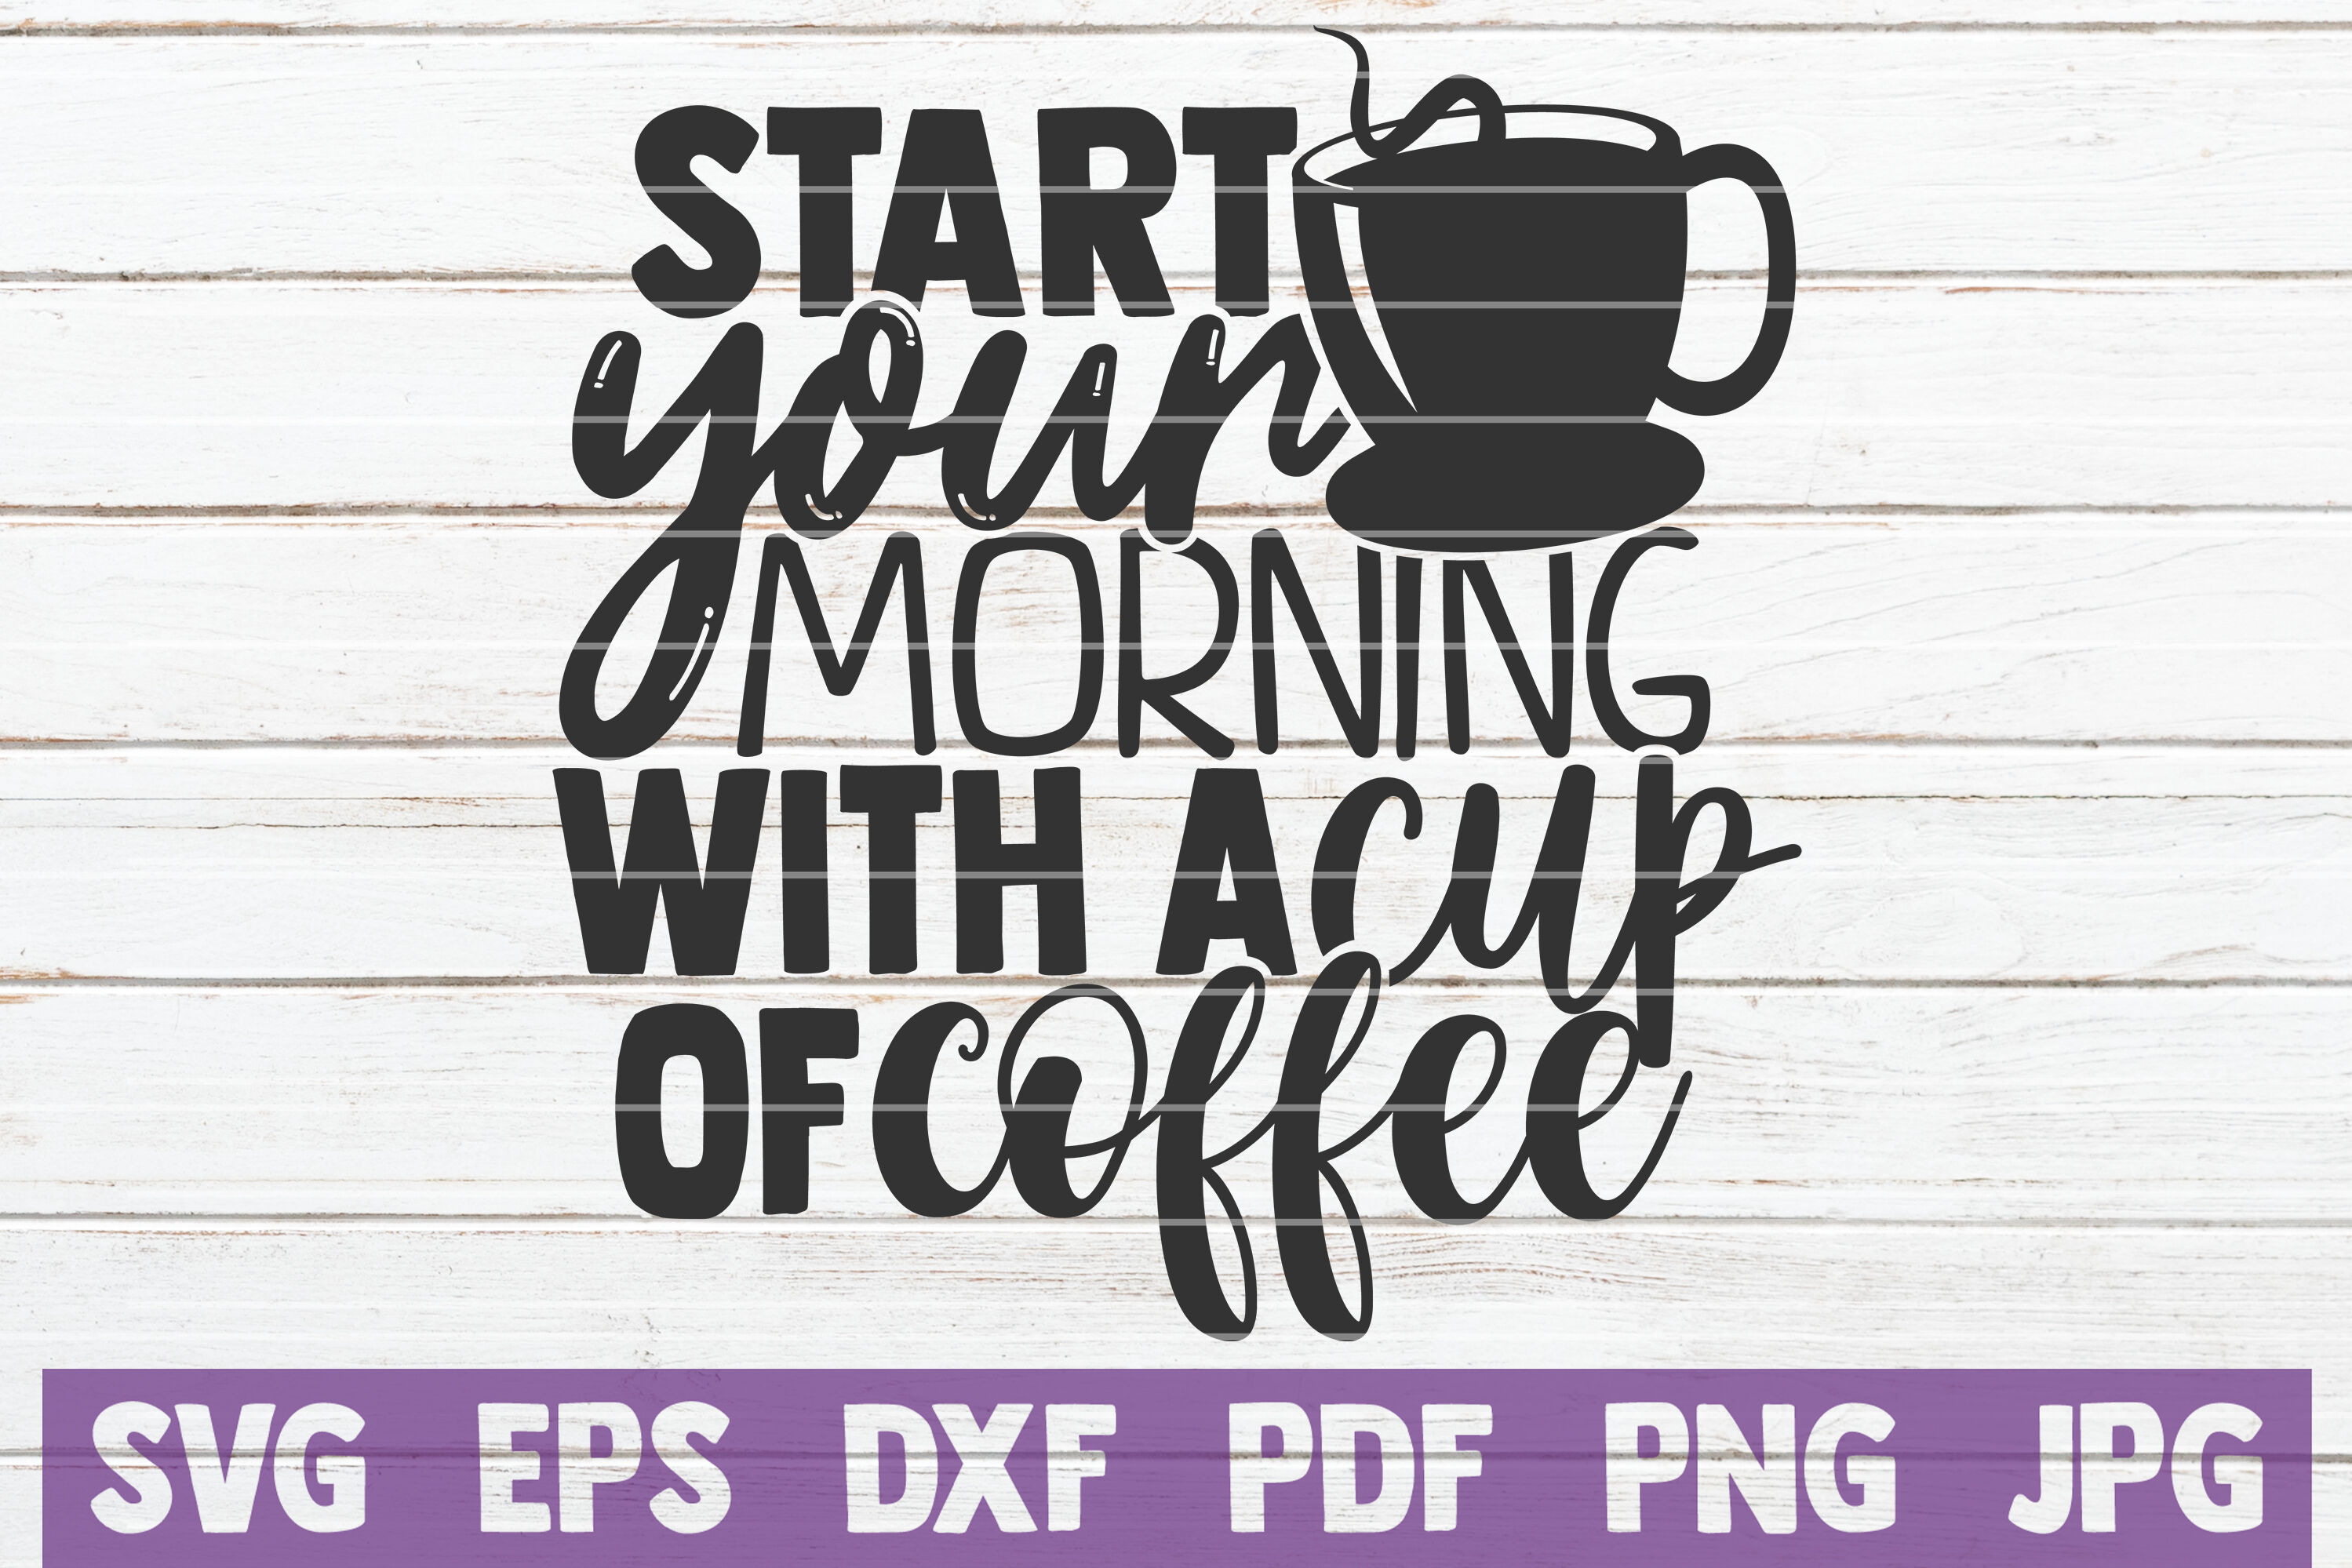 Start Your Morning With A Cup Of Coffee Svg Cut File By Mintymarshmallows Thehungryjpeg Com